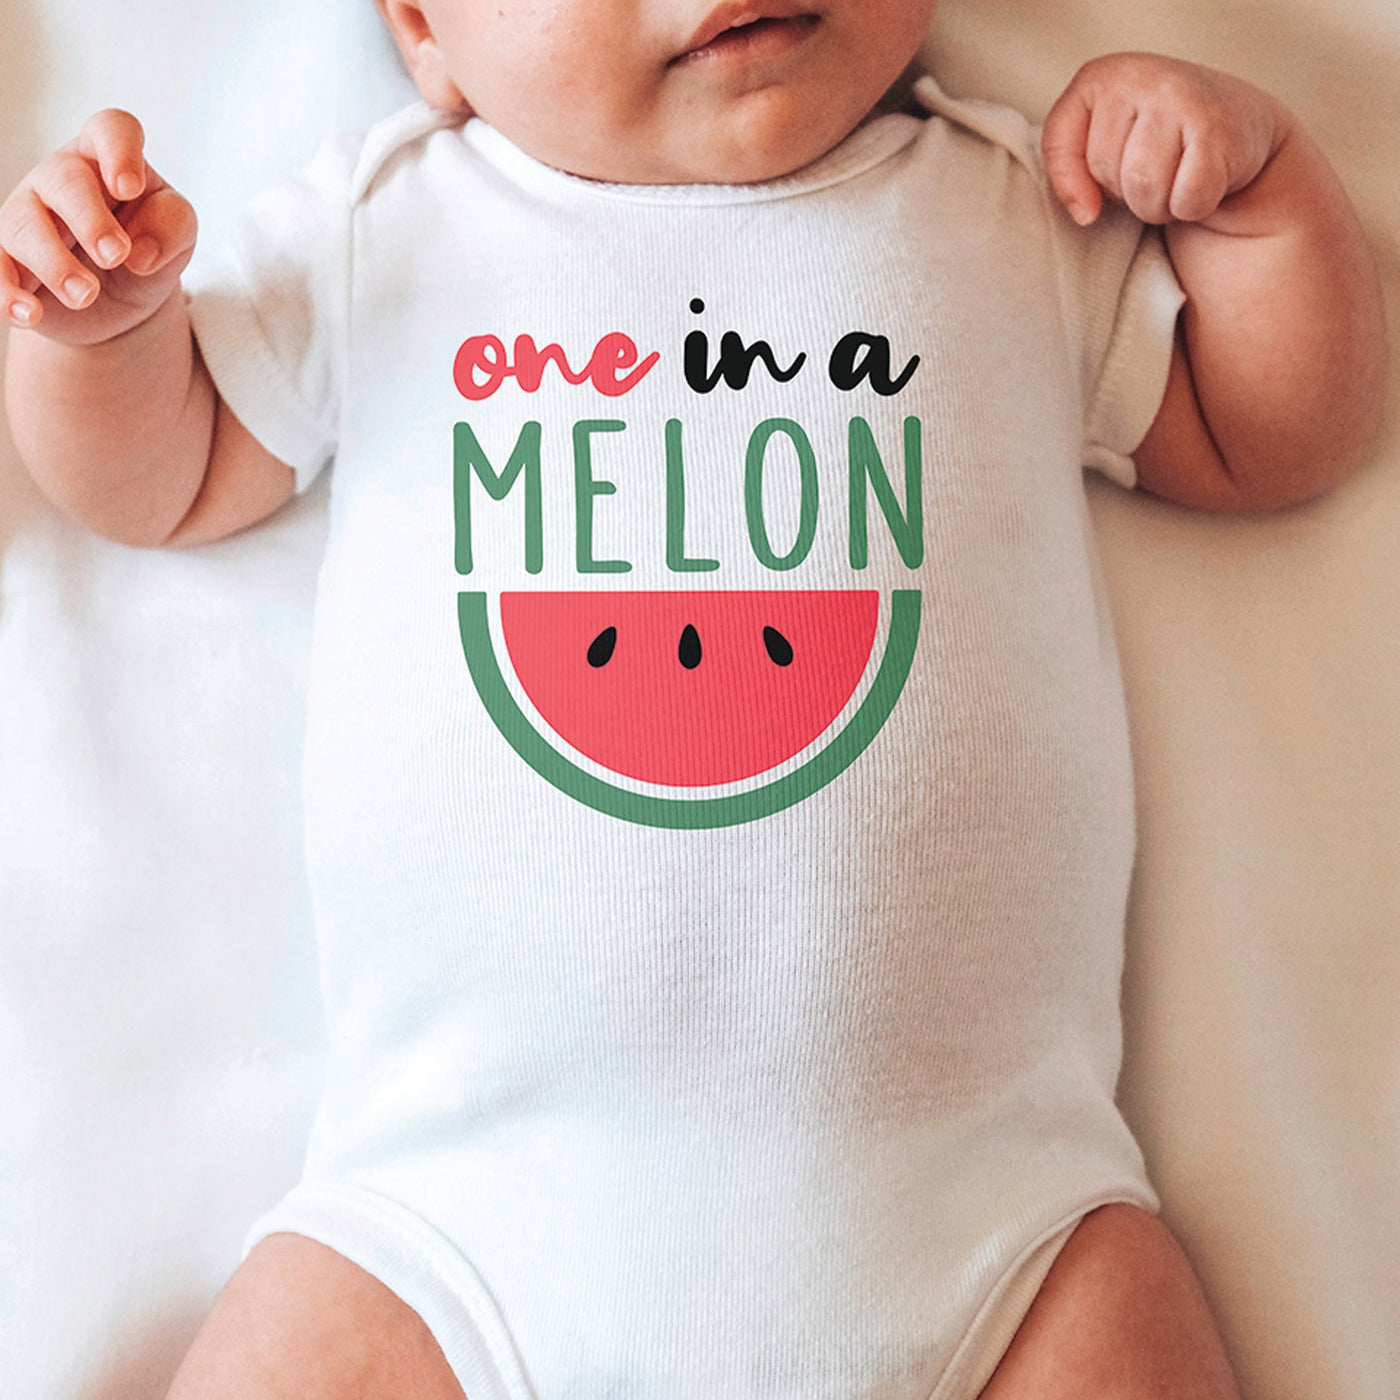 little baby wearing white onesie with pink black and green one in a melon watermelon print